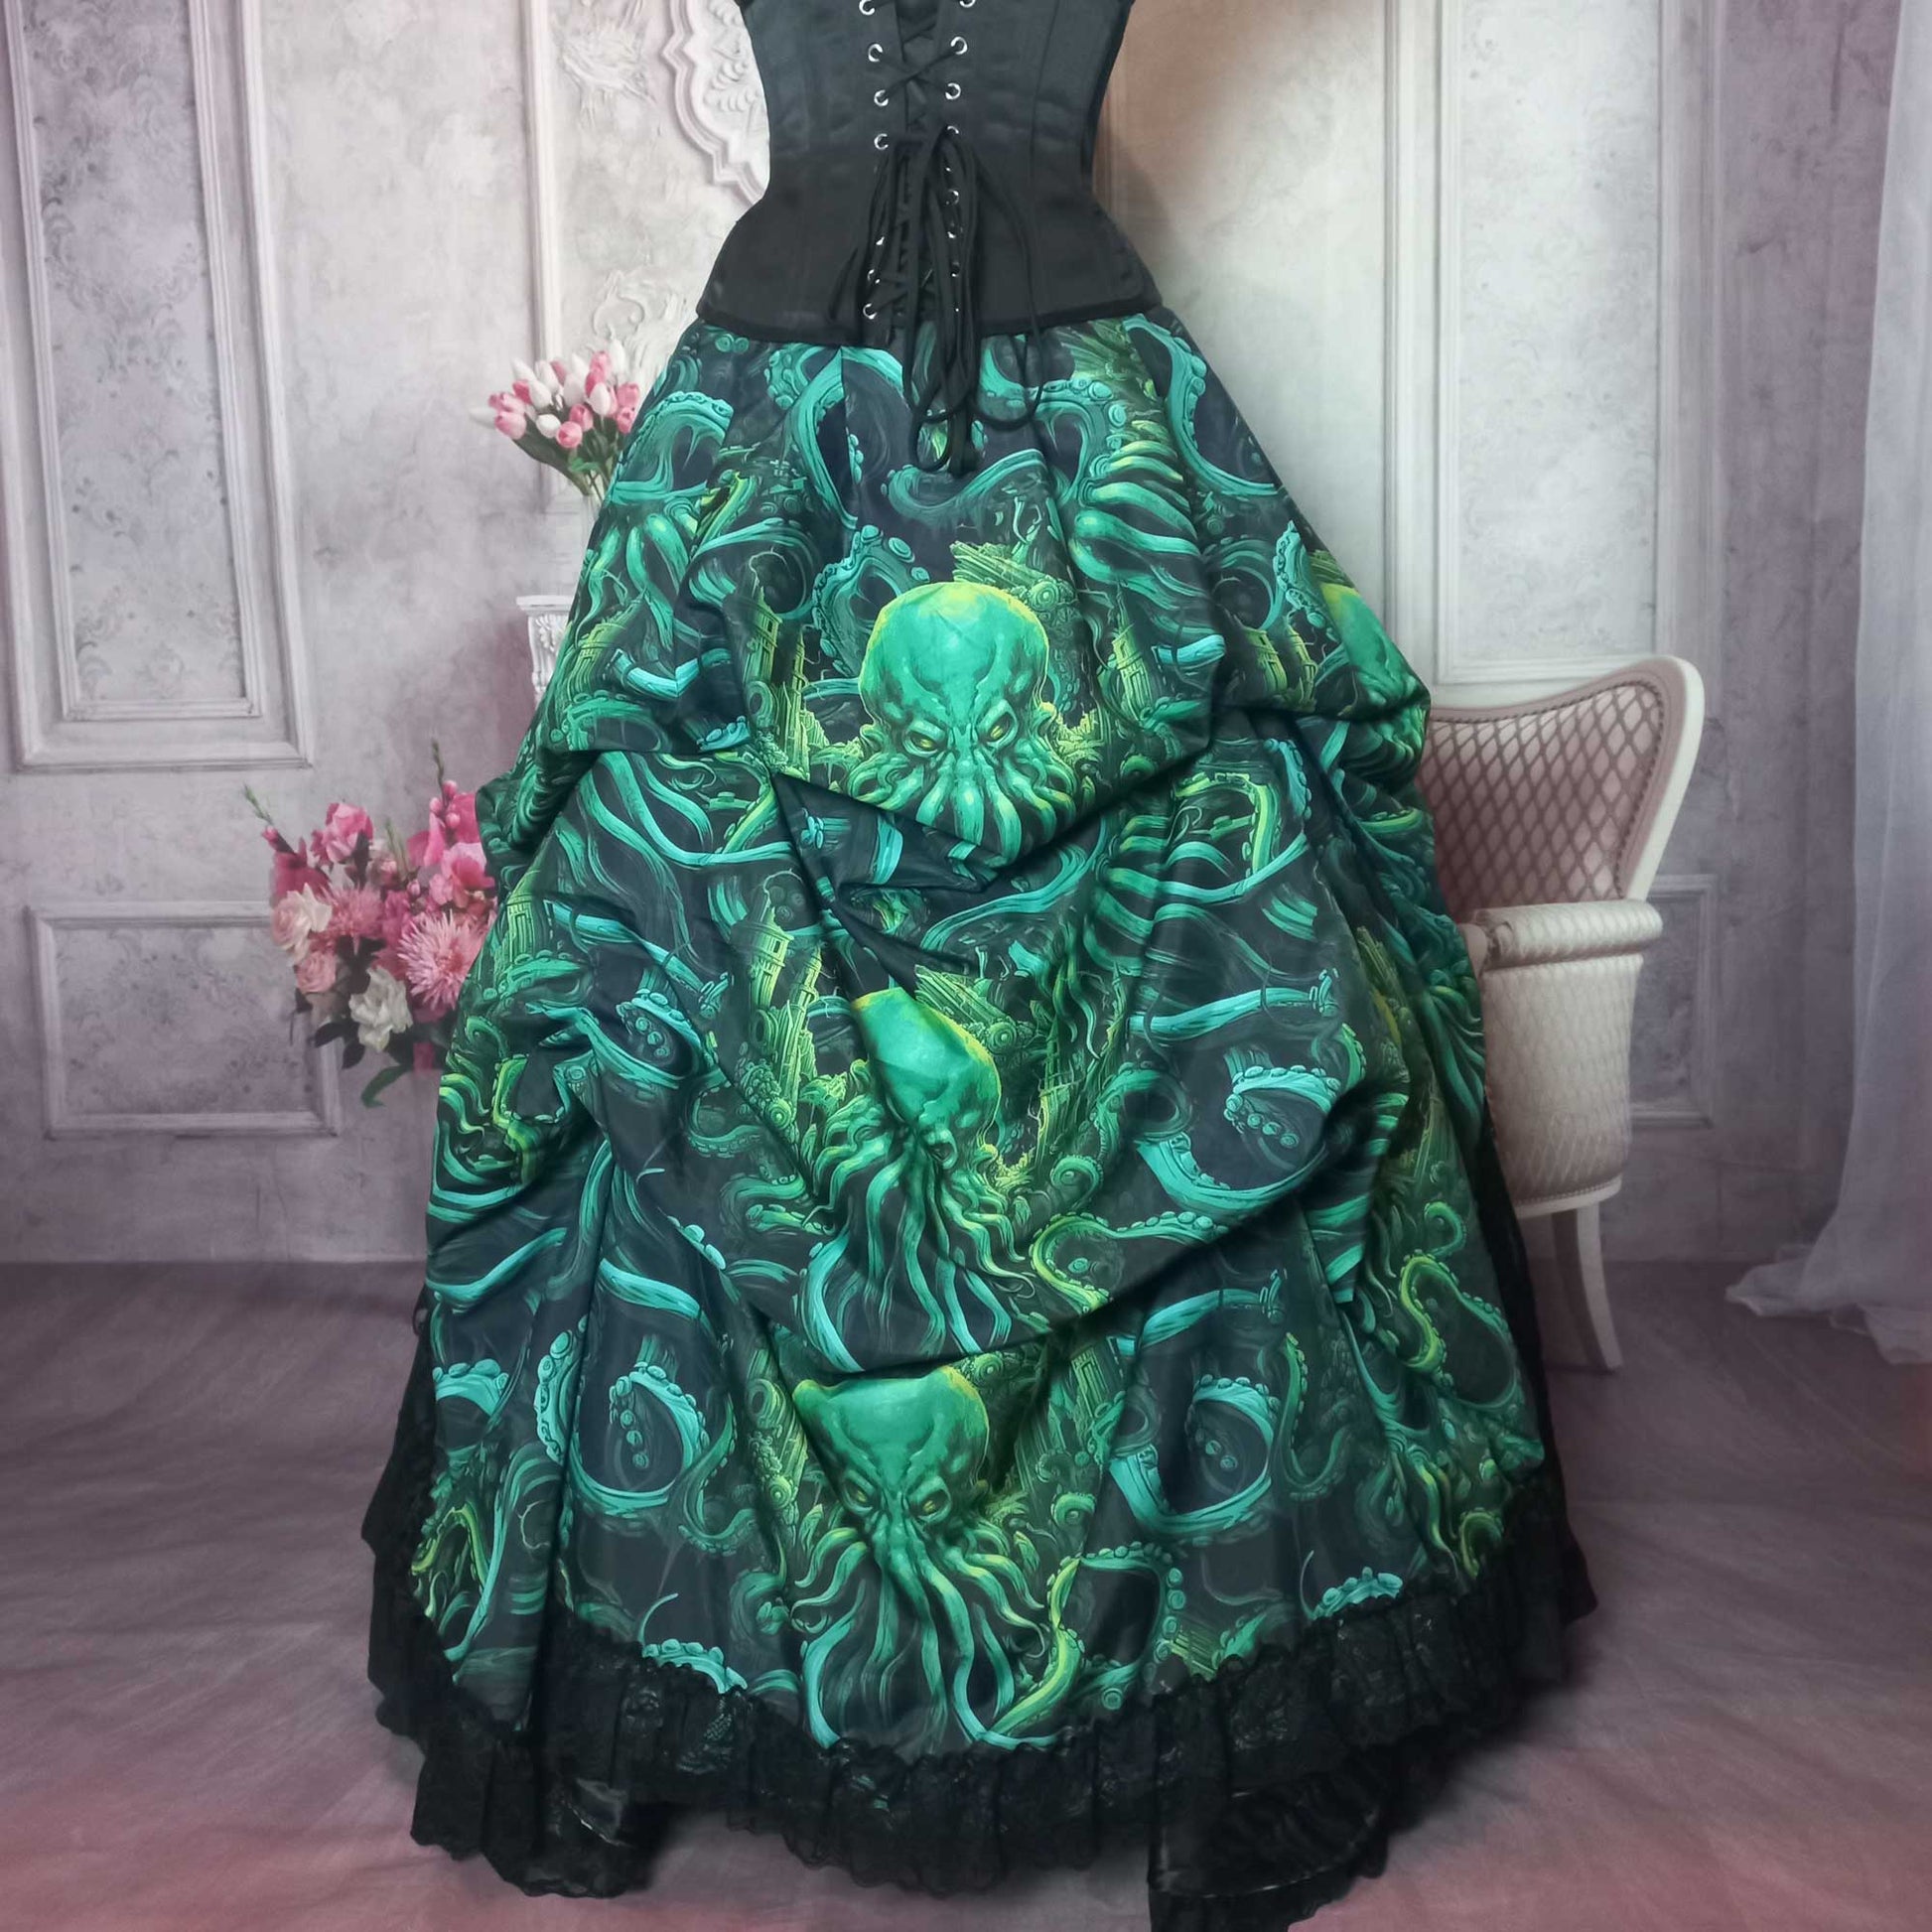 Call of Cthulhu victorian high low bustle skirt, made to measure in Australia worn over a petticoat and with a corset, back view